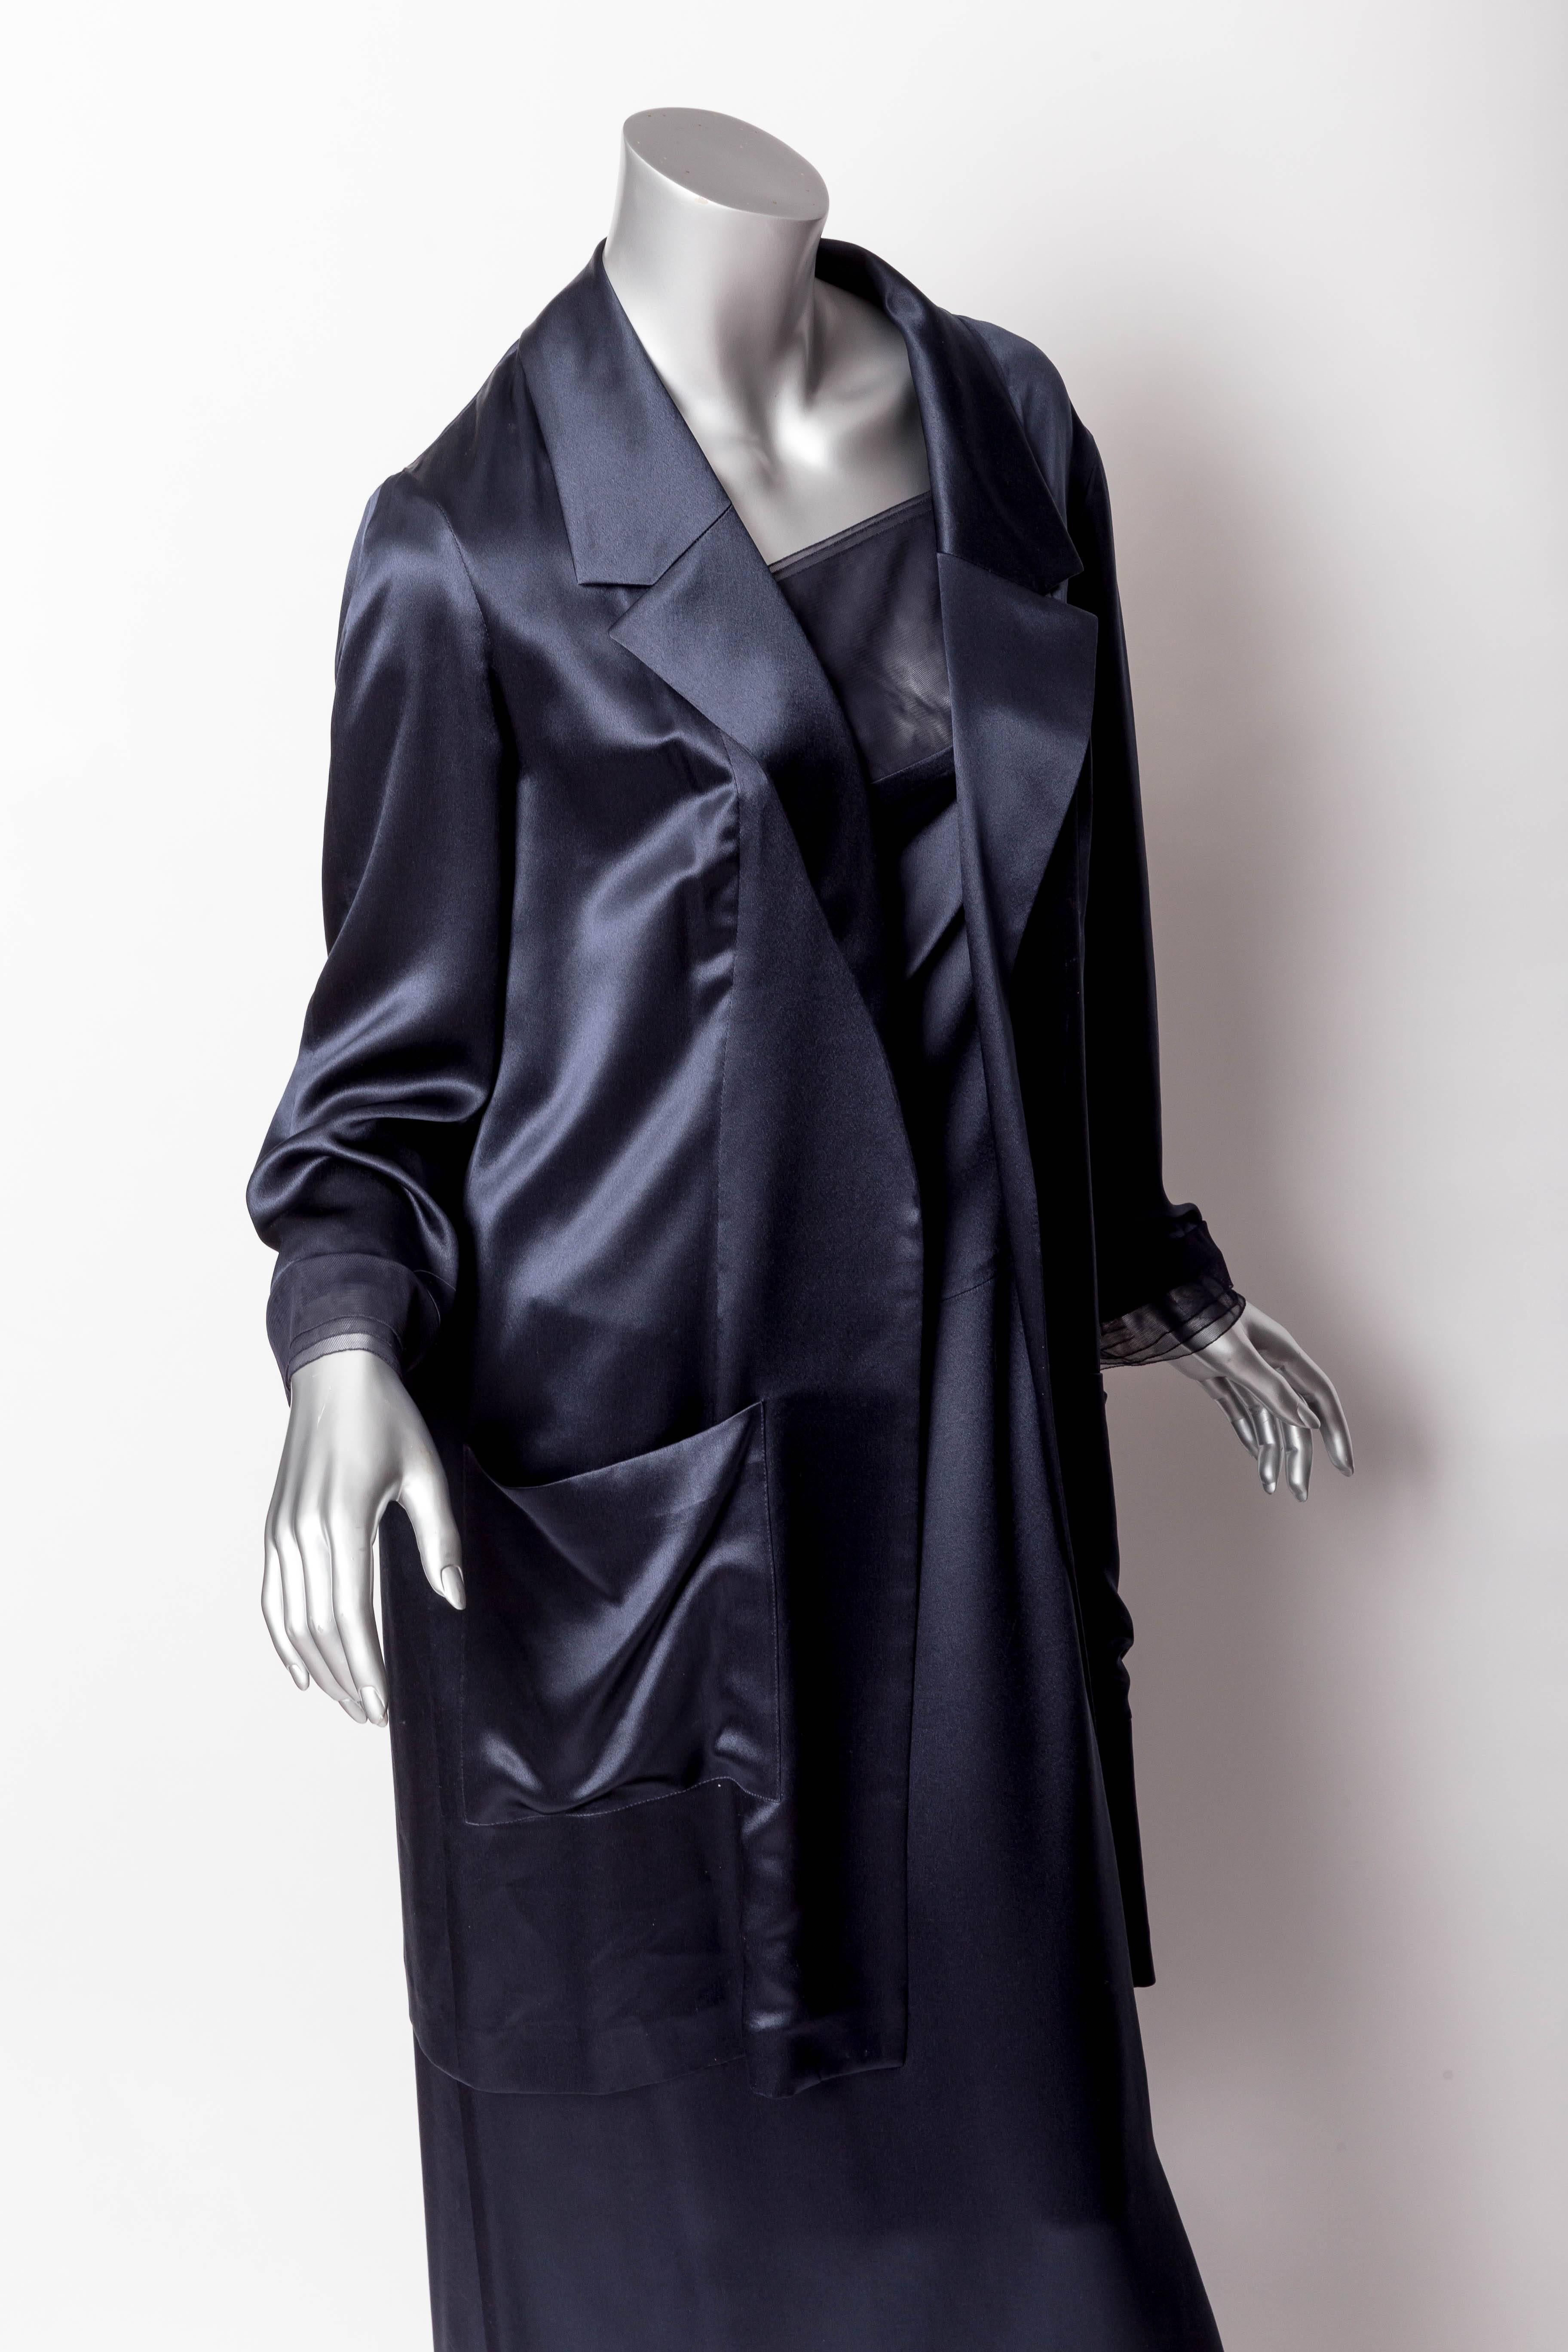 Chanel Dark Blue Silk and Tulle Long Dress with Kimono Style Jacket  For Sale 1